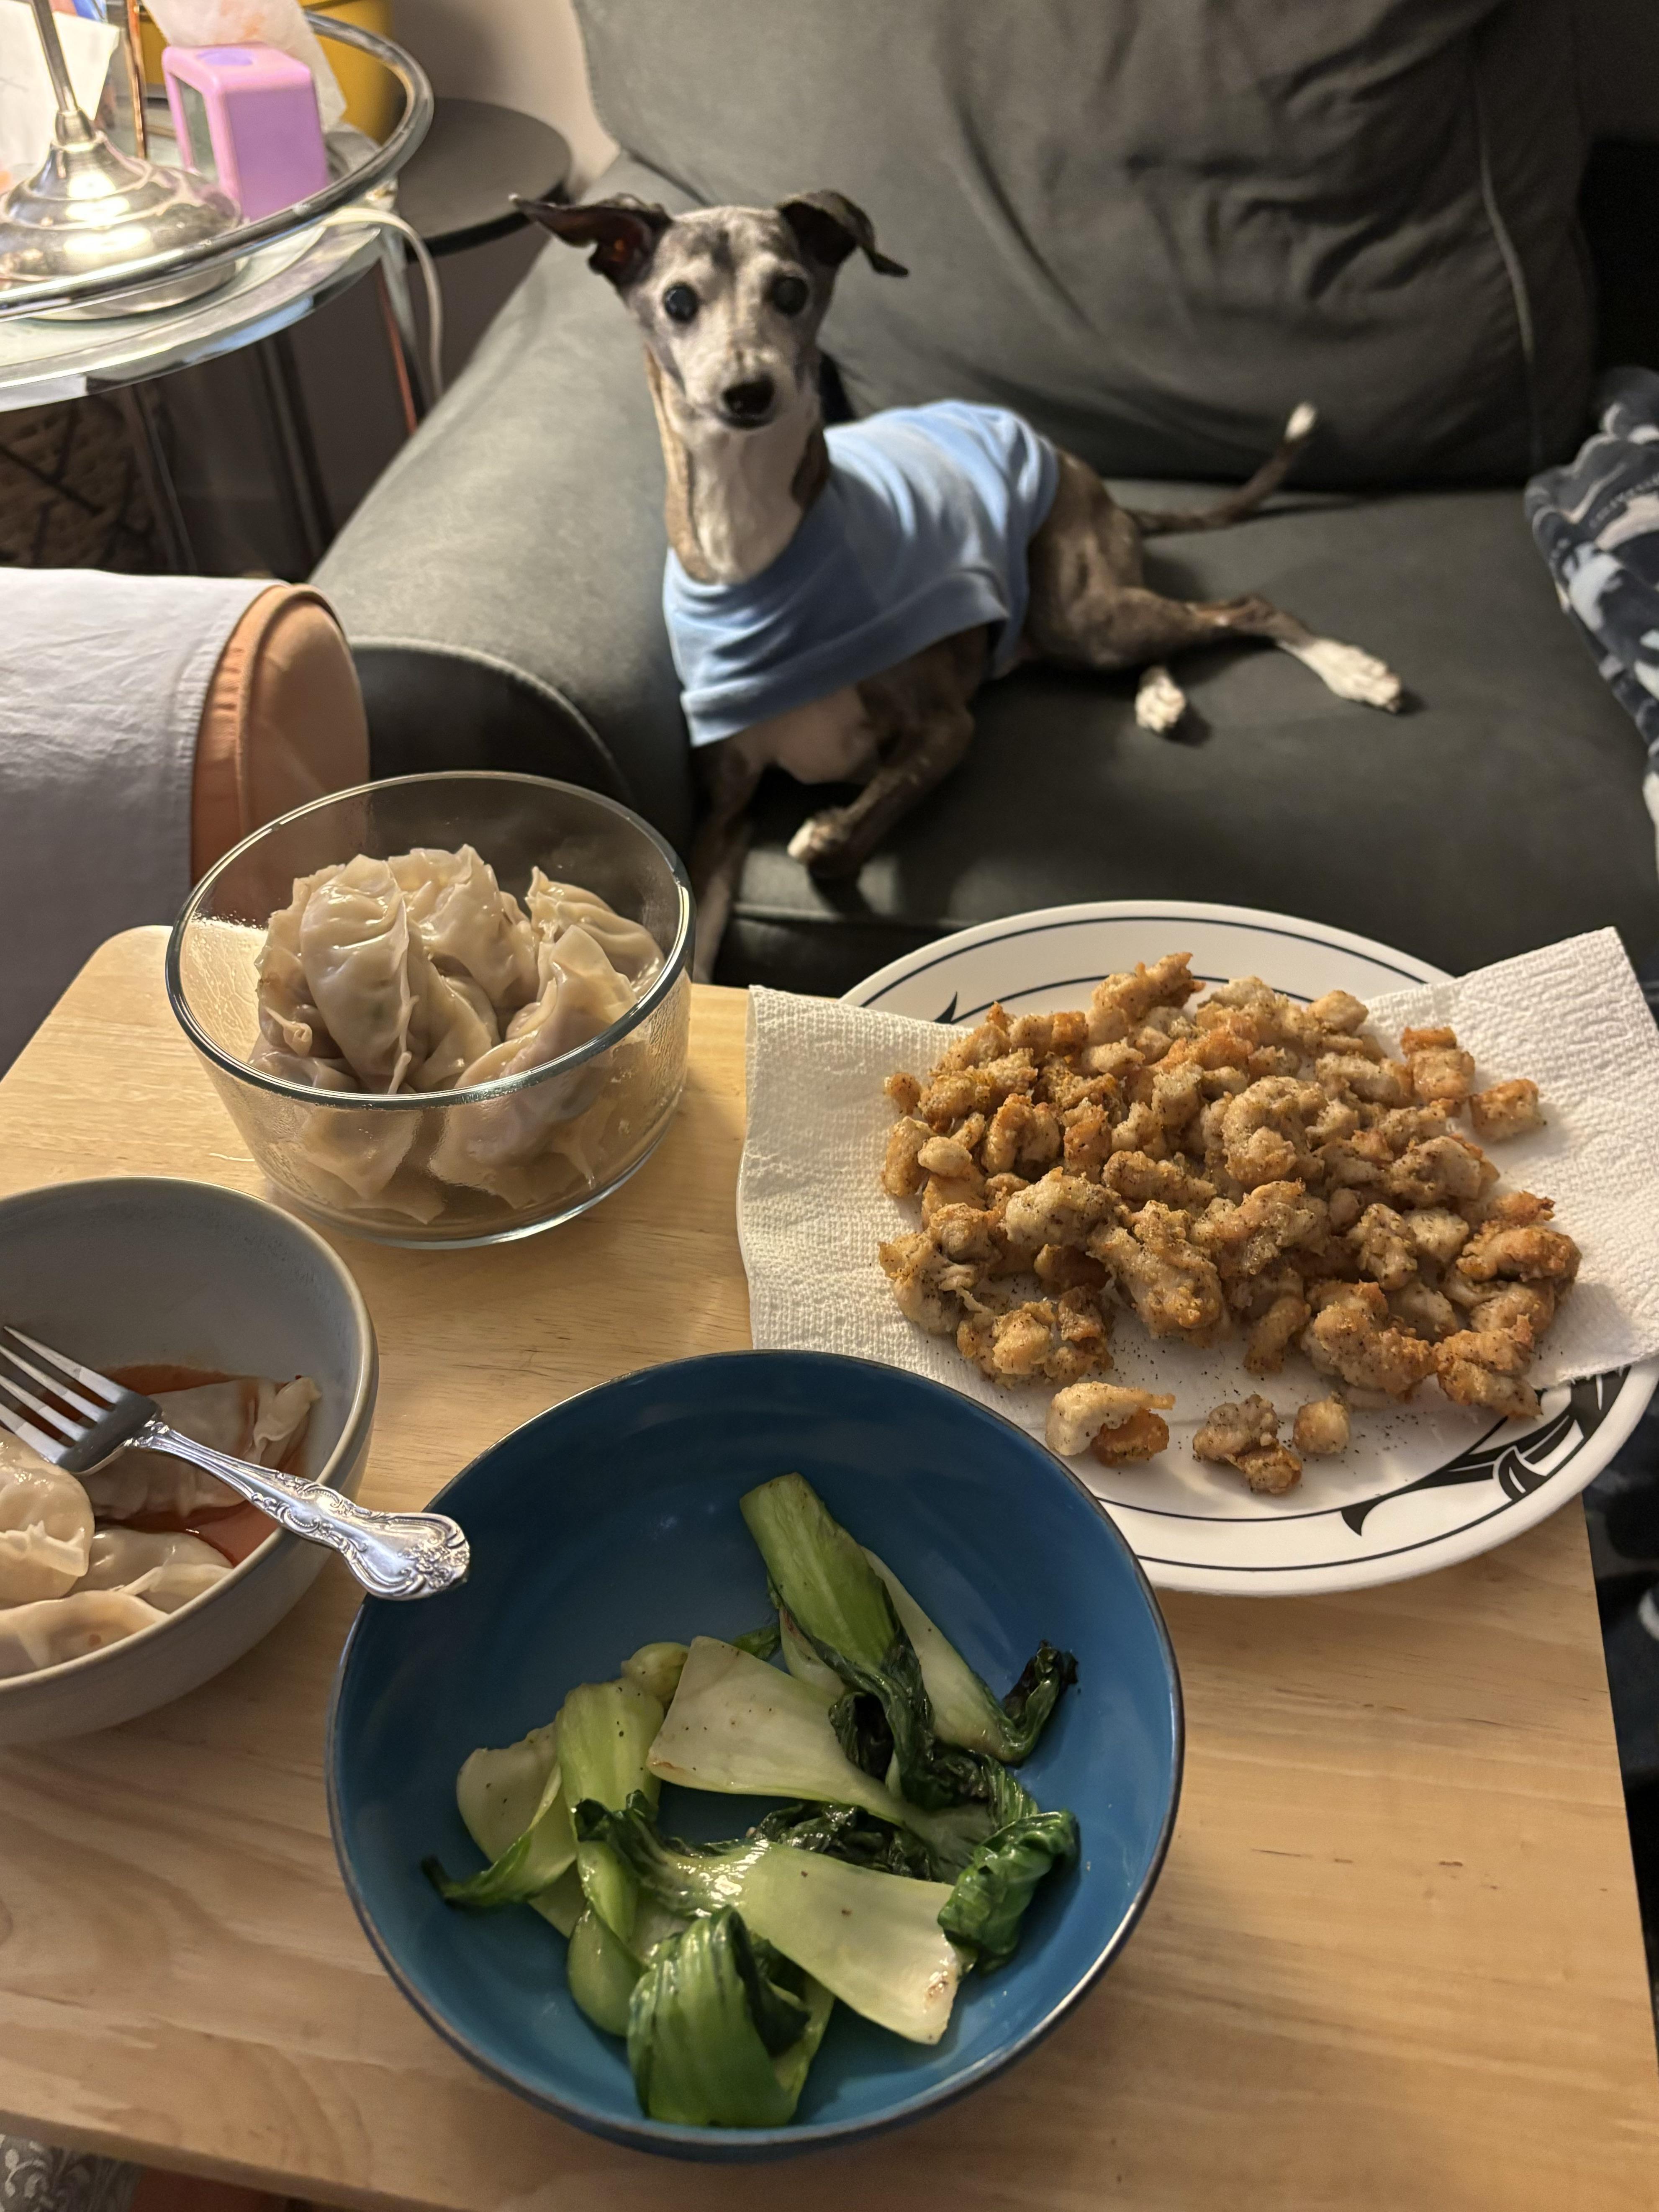 r/ItalianGreyhounds - Someone was very interested in our New Year’s dinner